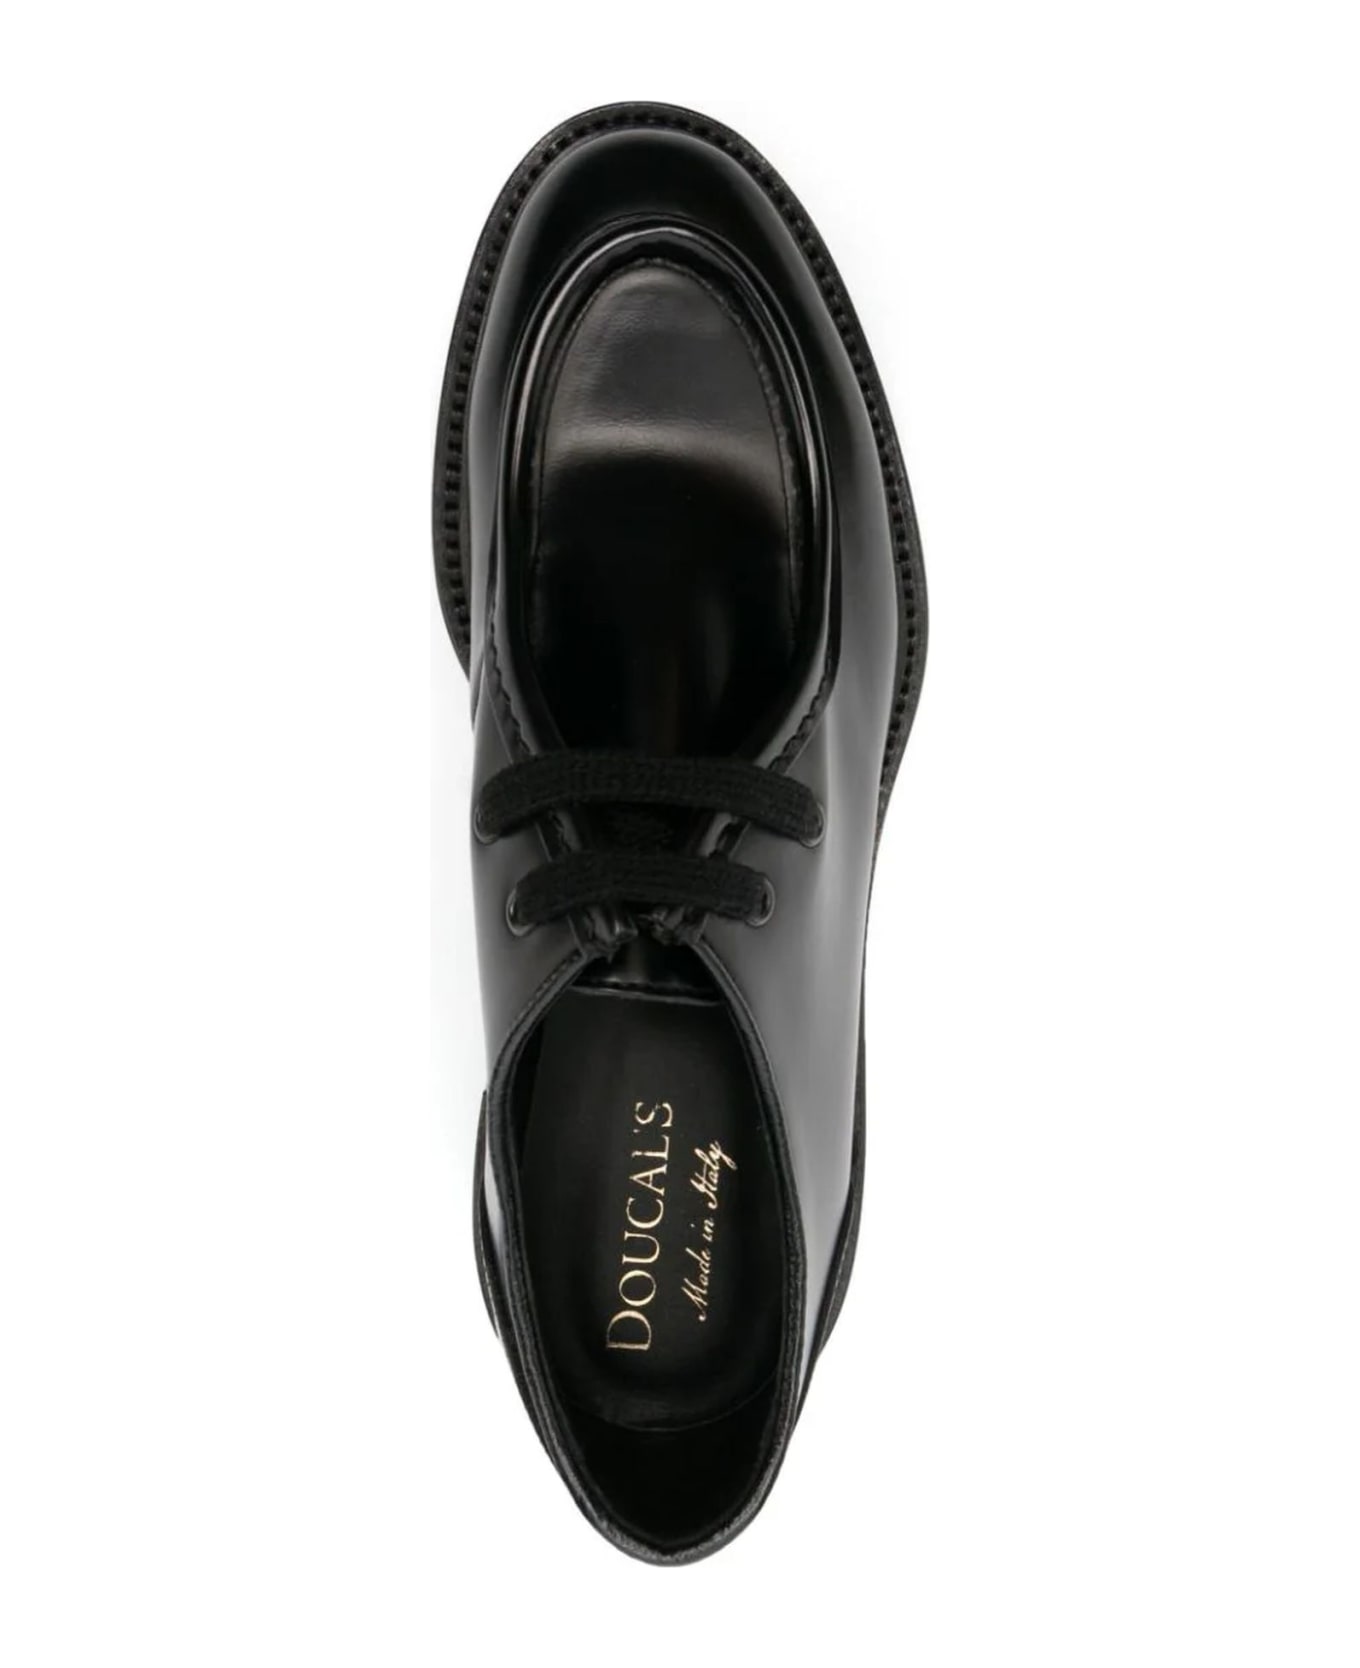 Doucal's Black Calf Leather Loafers - Black レースアップシューズ